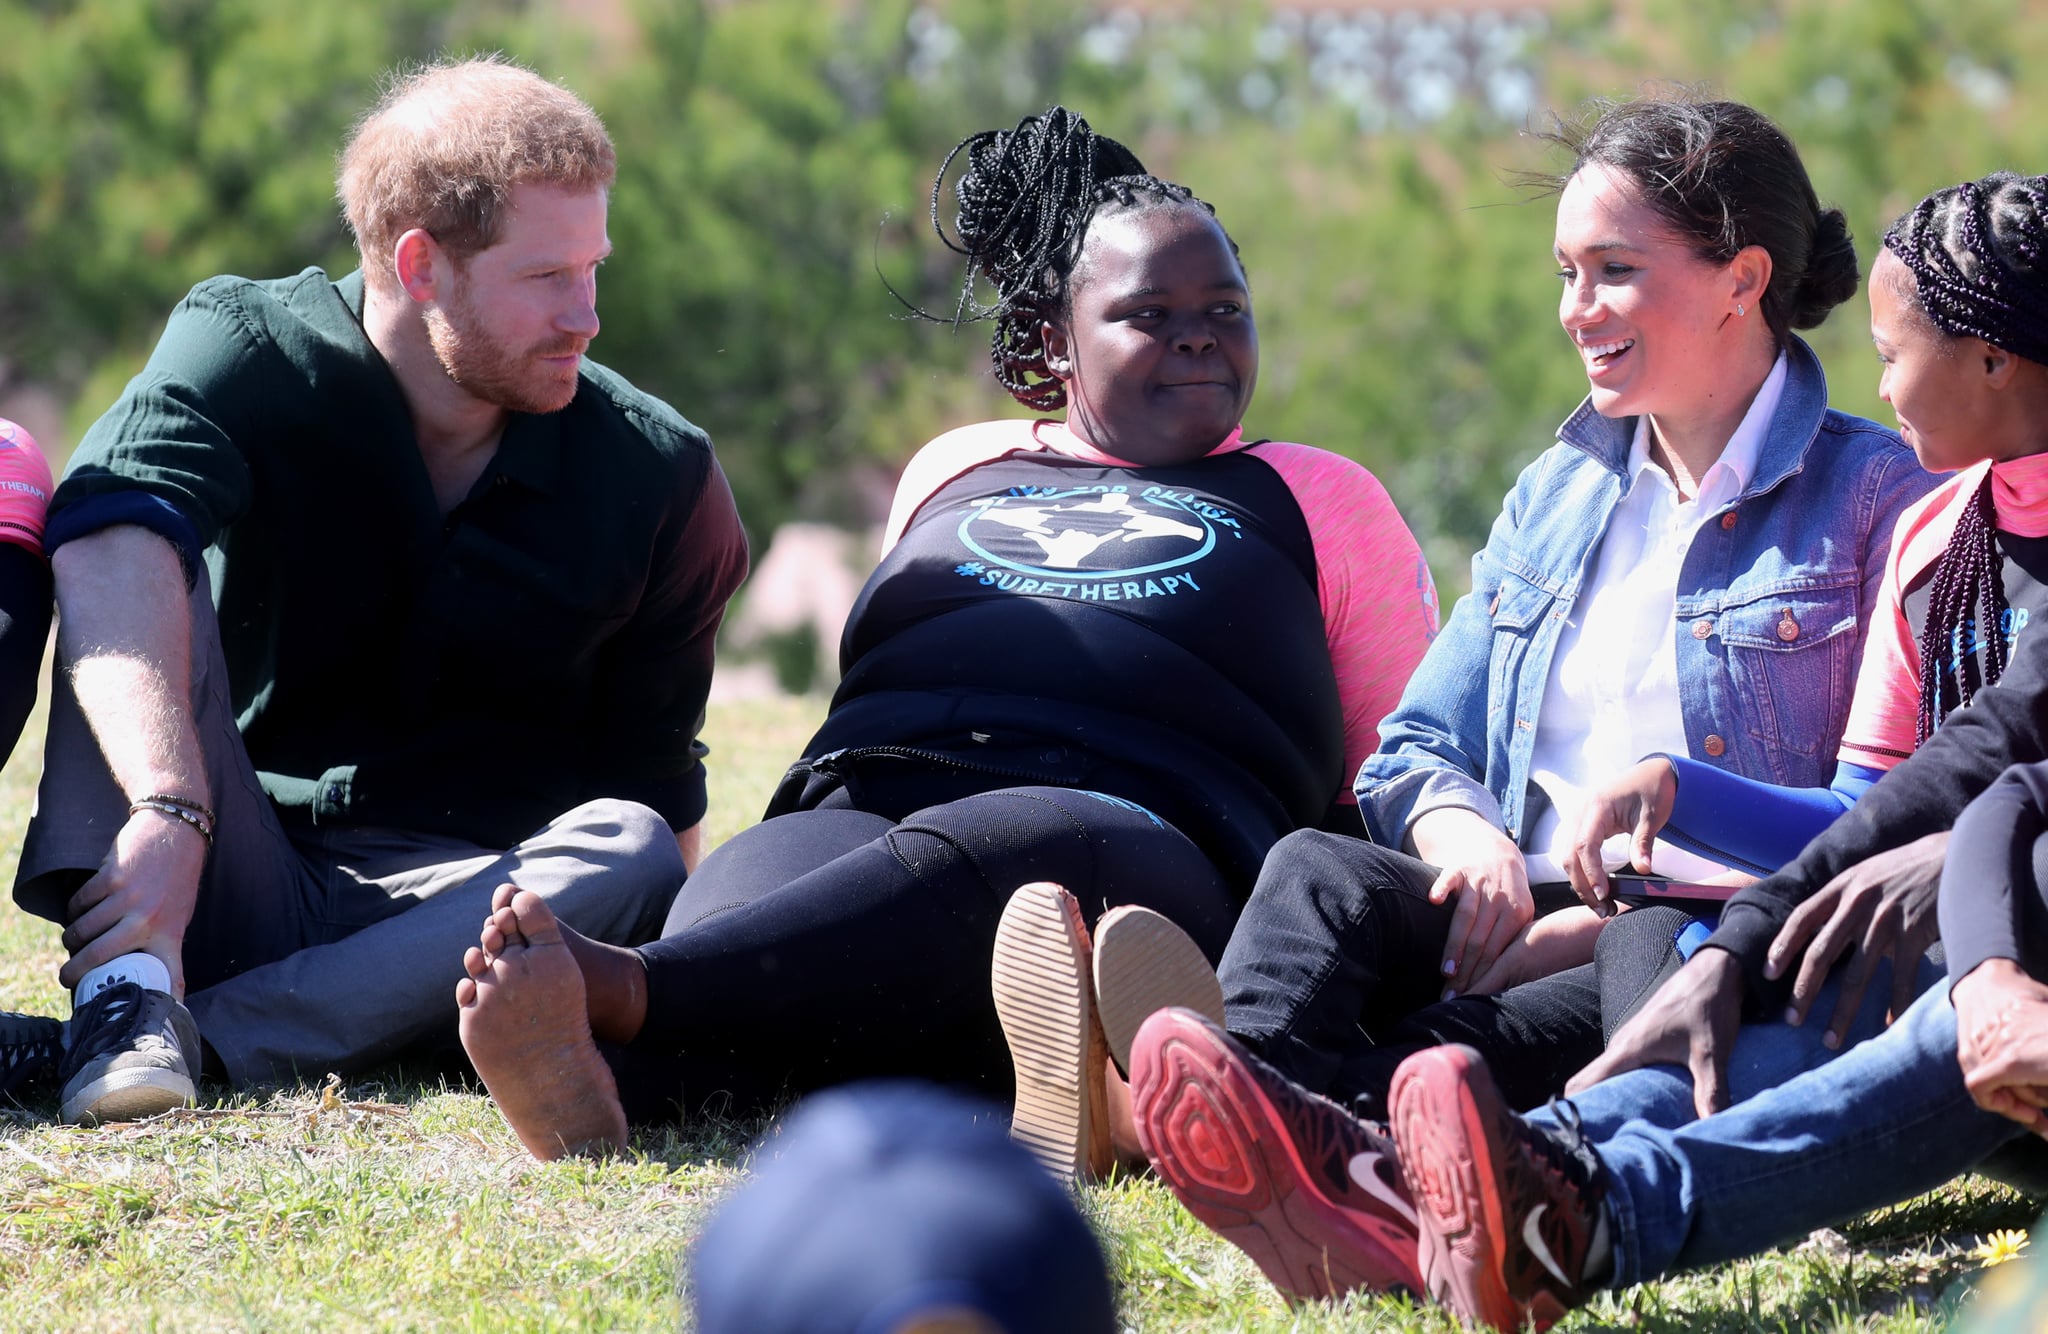 CAPE TOWN, SOUTH AFRICA - SEPTEMBER 24: Prince Harry, Duke of Sussex and Meghan, Duchess of Sussex join surf mentors and participate in a group activity to promote positive thinking, as they visit Waves for Change, an NGO, at Monwabisi Beach on September 24, 2019 in Cape Town, South Africa. Waves for Change supports local surf mentors to provide mental health services to vulnerable young people living in under resourced communities. (Photo by Chris Jackson - Pool/Getty Images)